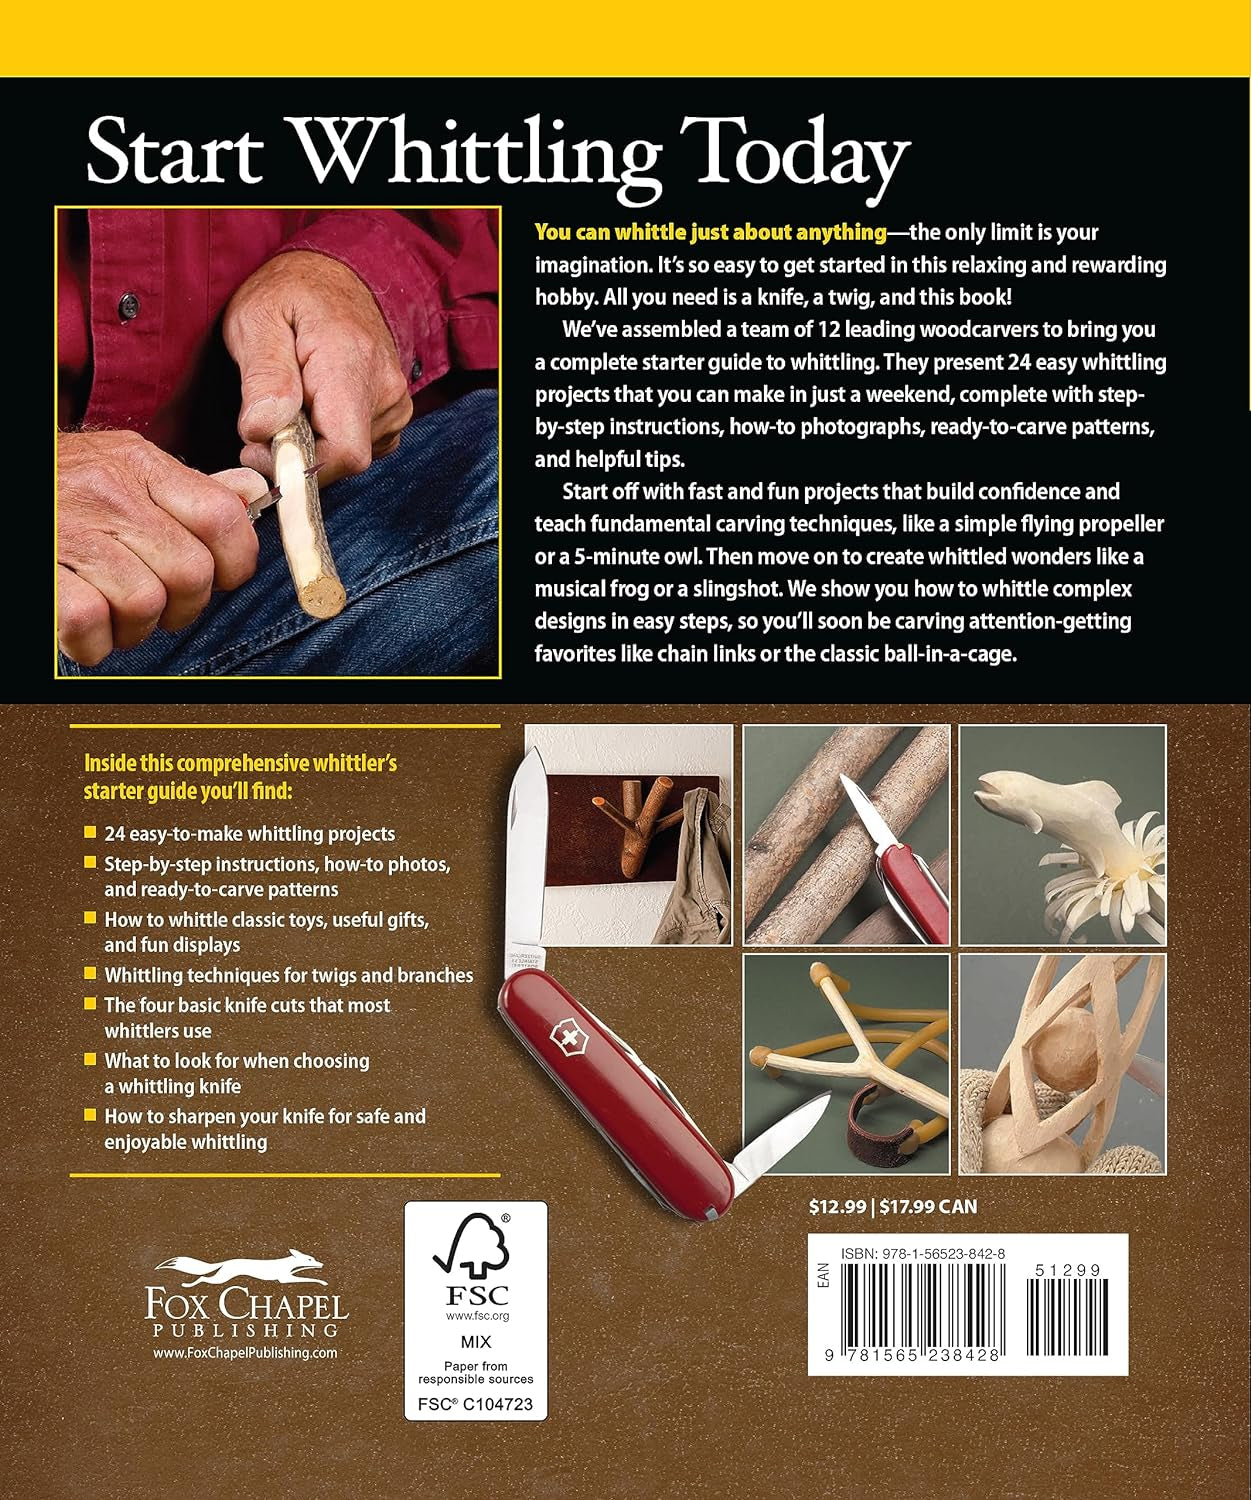 Complete Starter Guide to Whittling: 24 Easy Projects You Can Make in a Weekend (Fox Chapel Publishing) Beginner-Friendly Step-By-Step Instructions, Tips, and Ready-To-Carve Patterns for Toys & Gifts